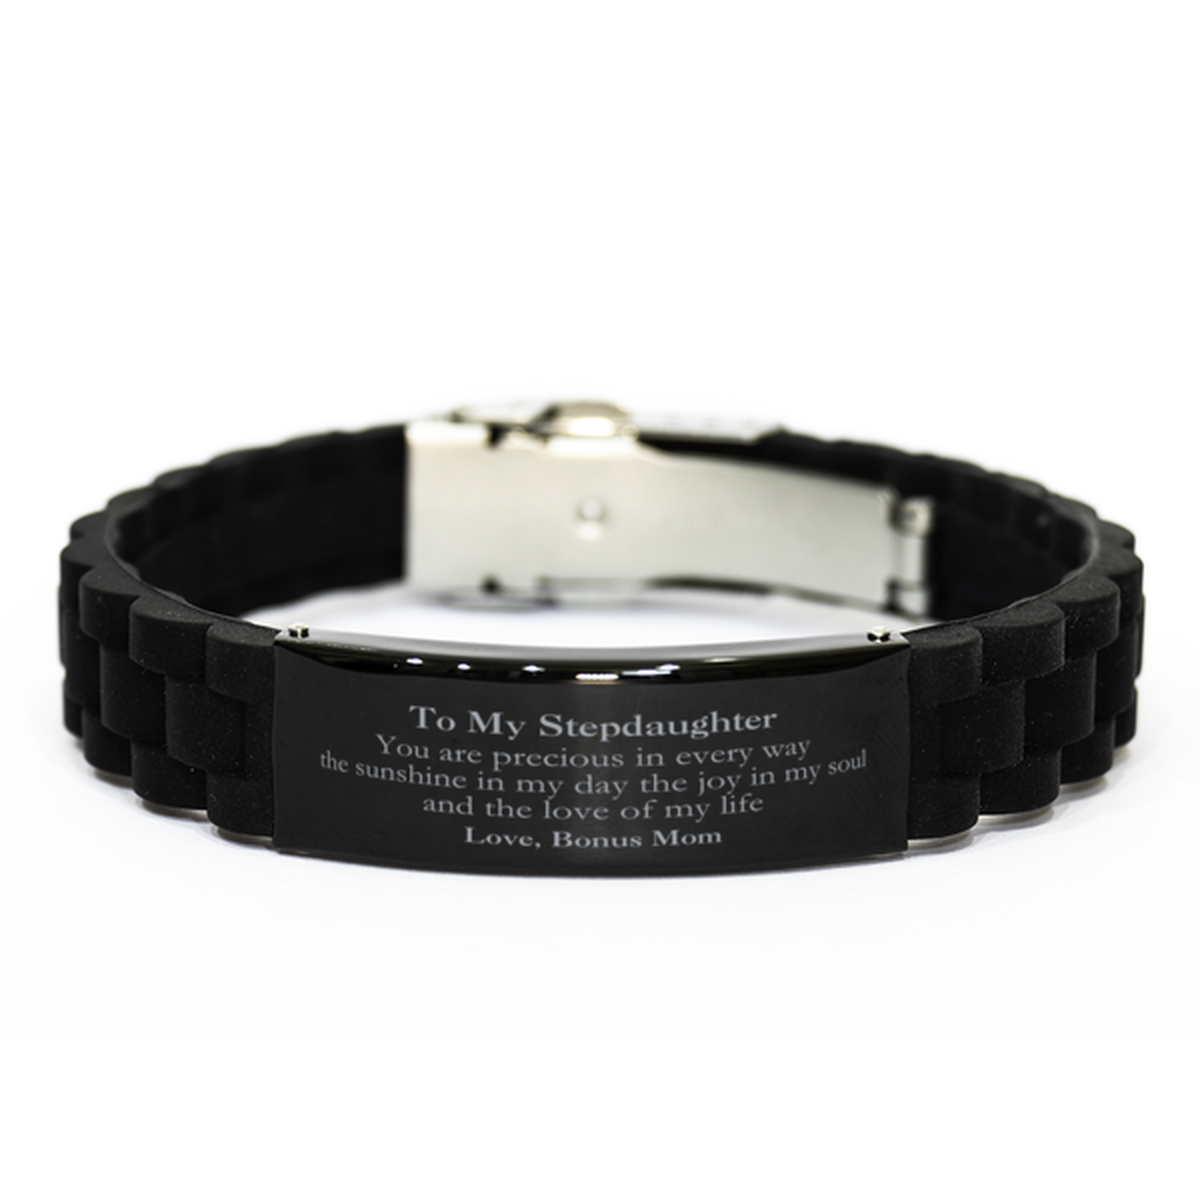 Graduation Gifts for Stepdaughter Black Glidelock Clasp Bracelet Present from Bonus Mom, Christmas Stepdaughter Birthday Gifts Stepdaughter You are precious in every way the sunshine in my day. Love, Bonus Mom